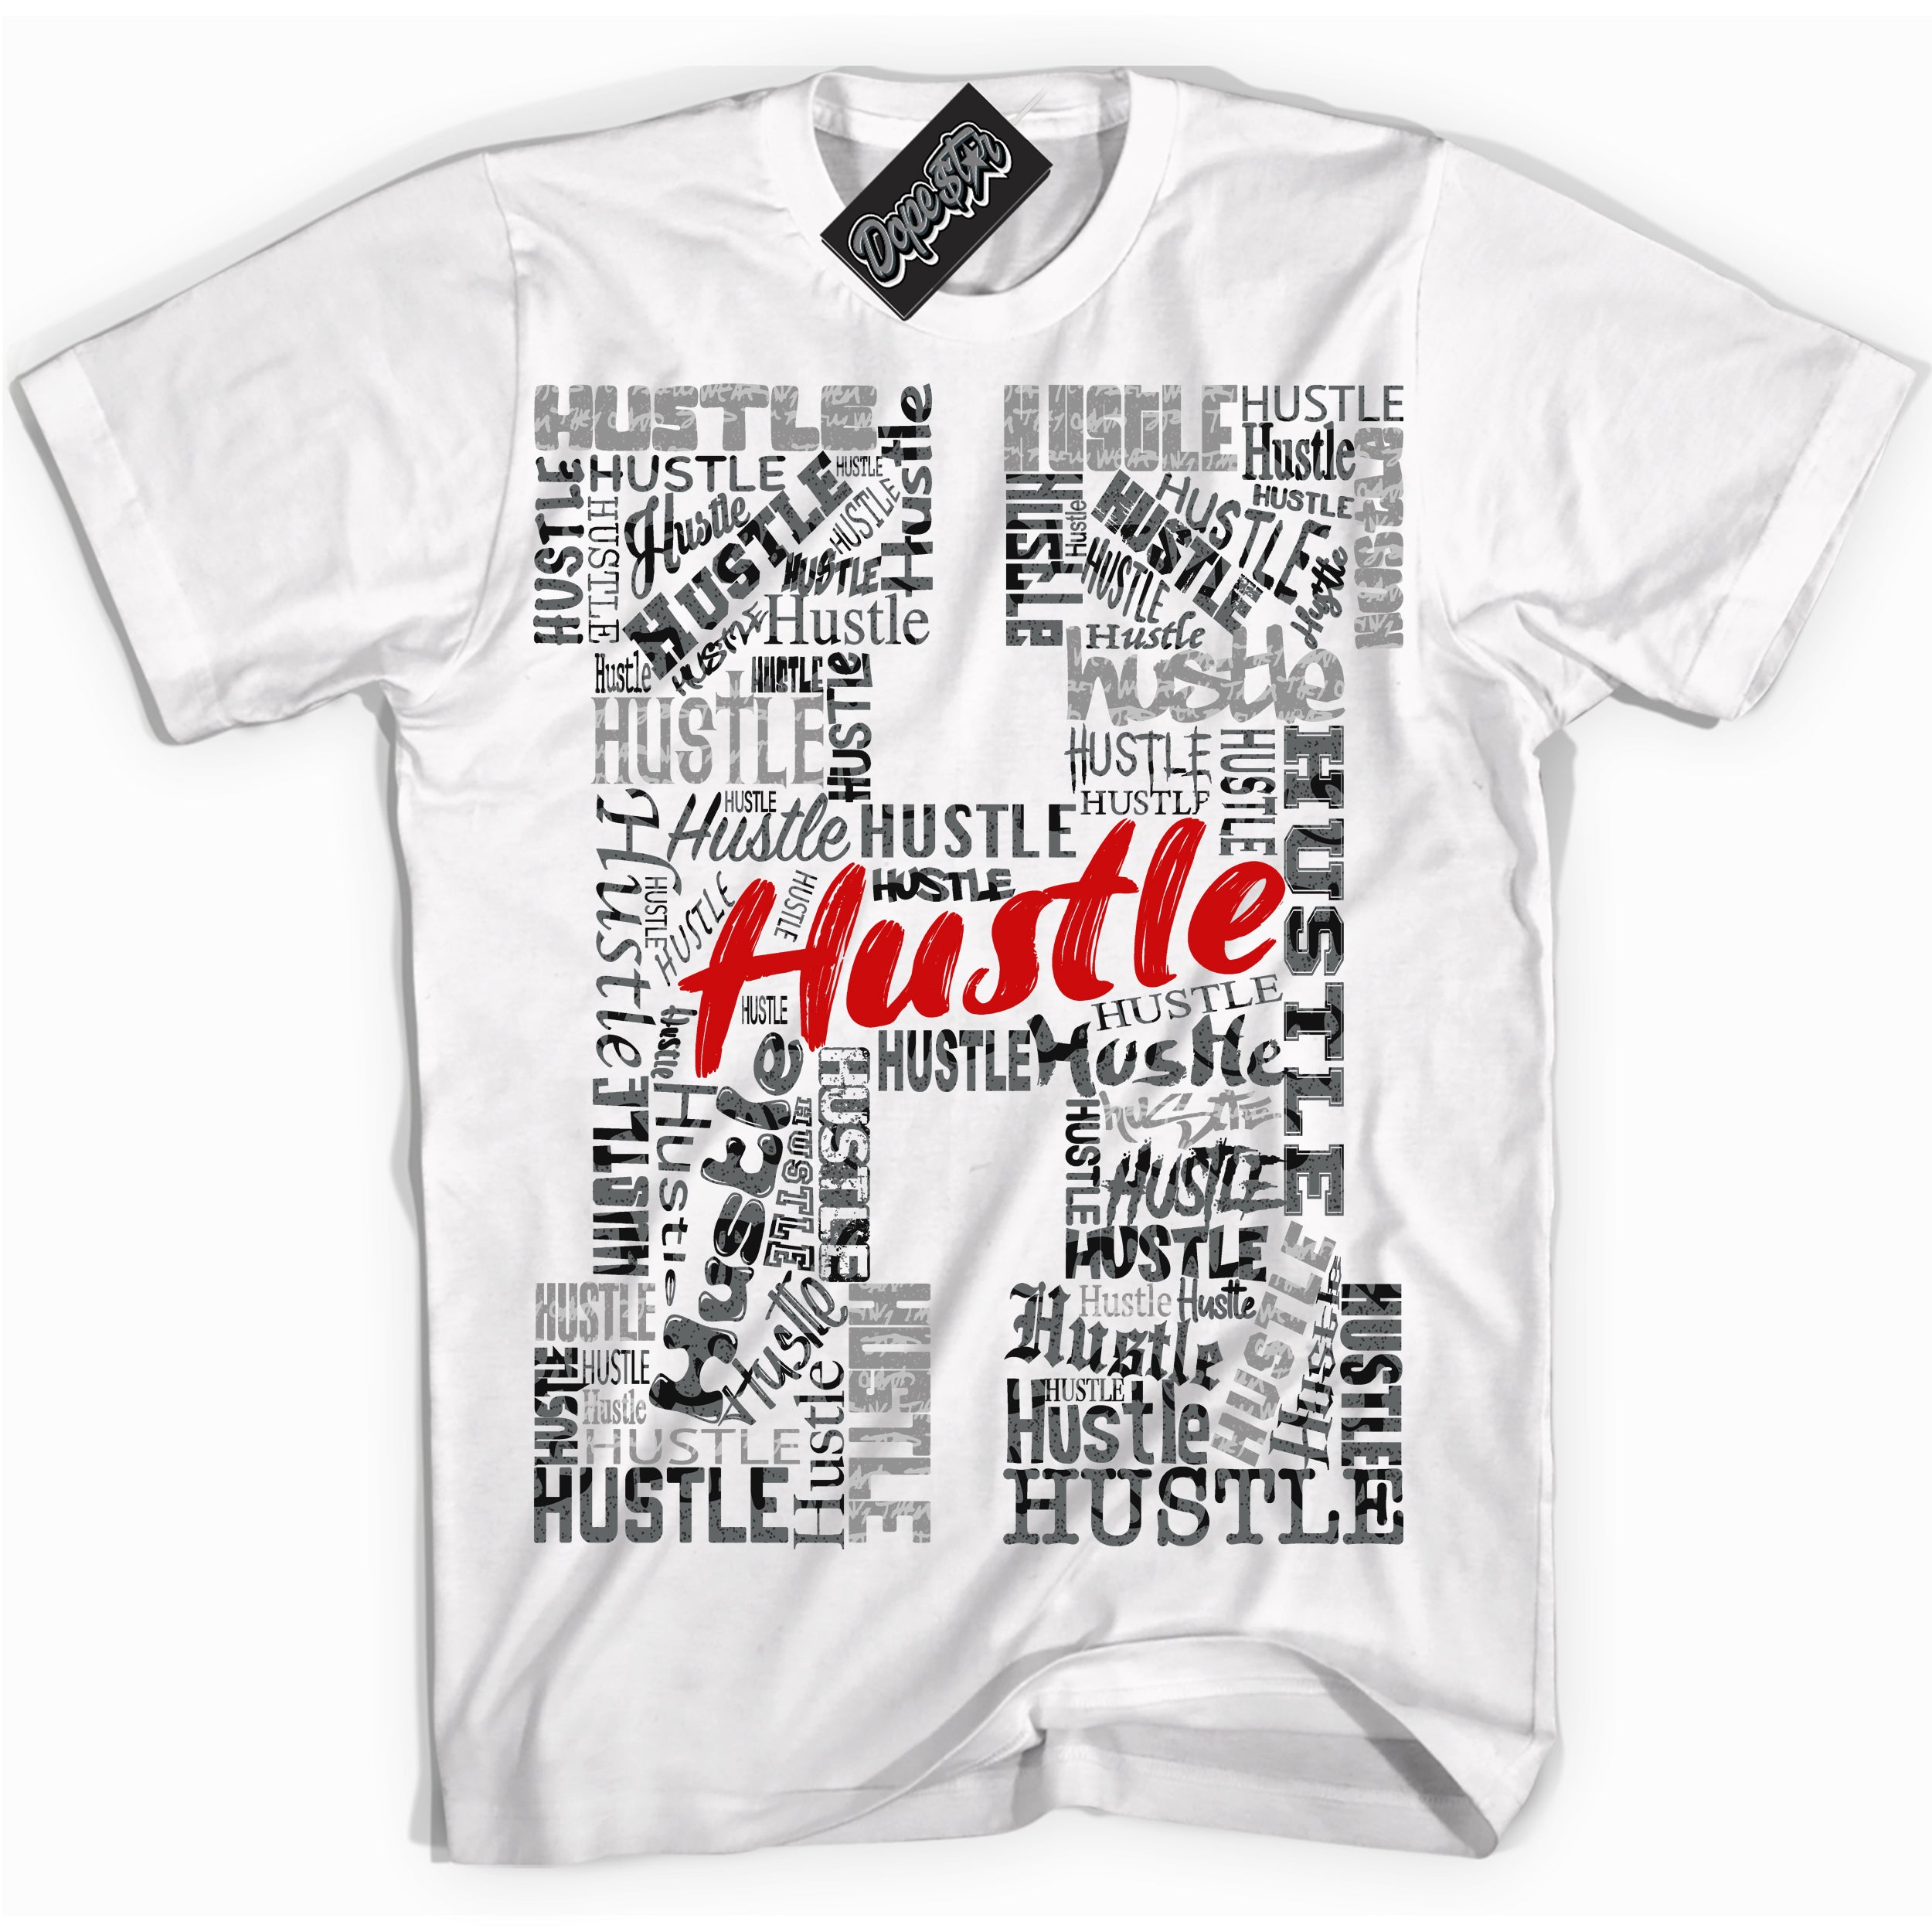 Cool White Shirt with “ Hustle H ” design that perfectly matches Rebellionaire 1s Sneakers.